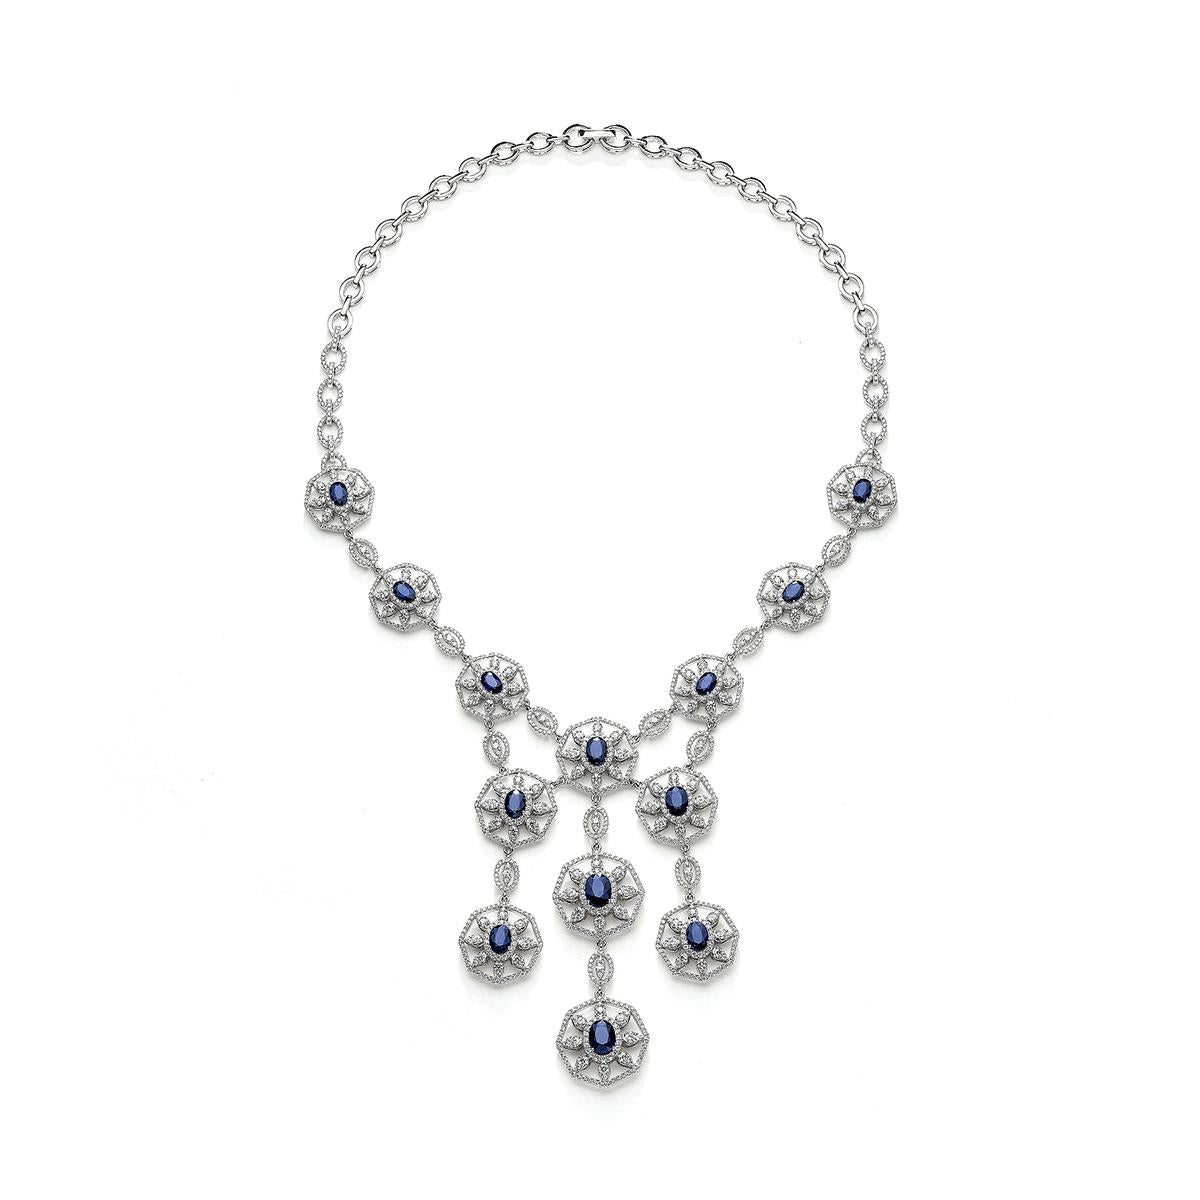 Necklace in 18kt white gold set with 13 oval cut sapphires 11.27 cts and 1446 diamonds 11.20 cts